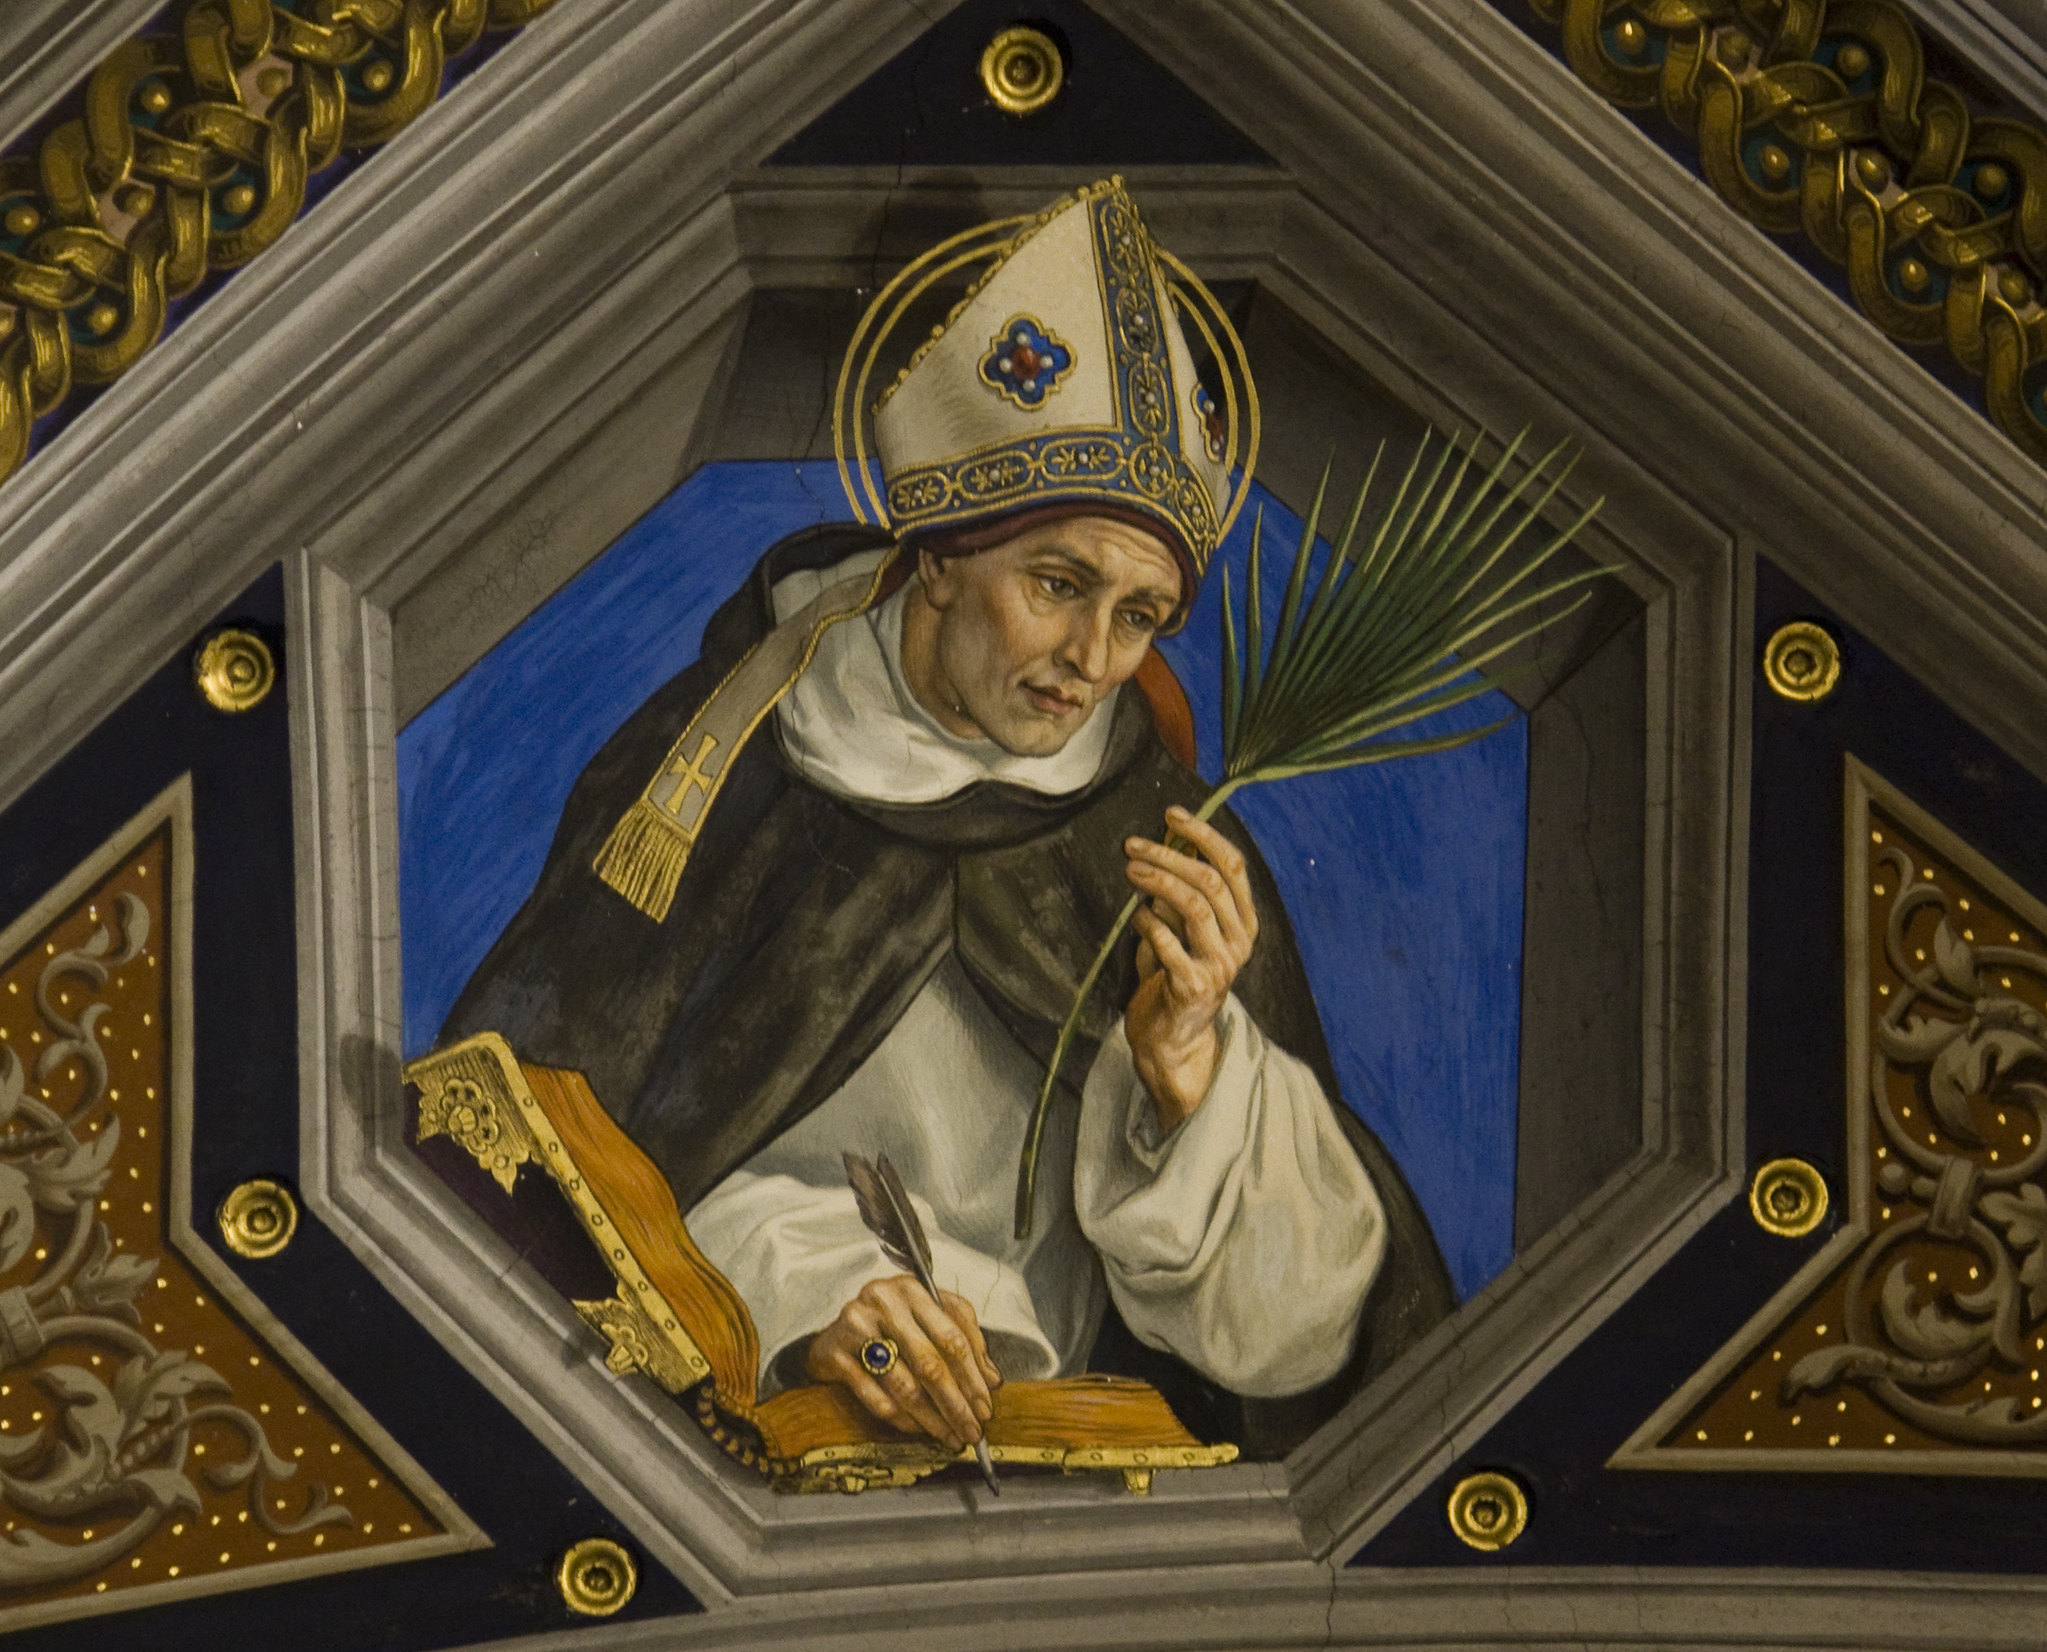 St. Albert the Great: Saintly Scientist for the Modern World